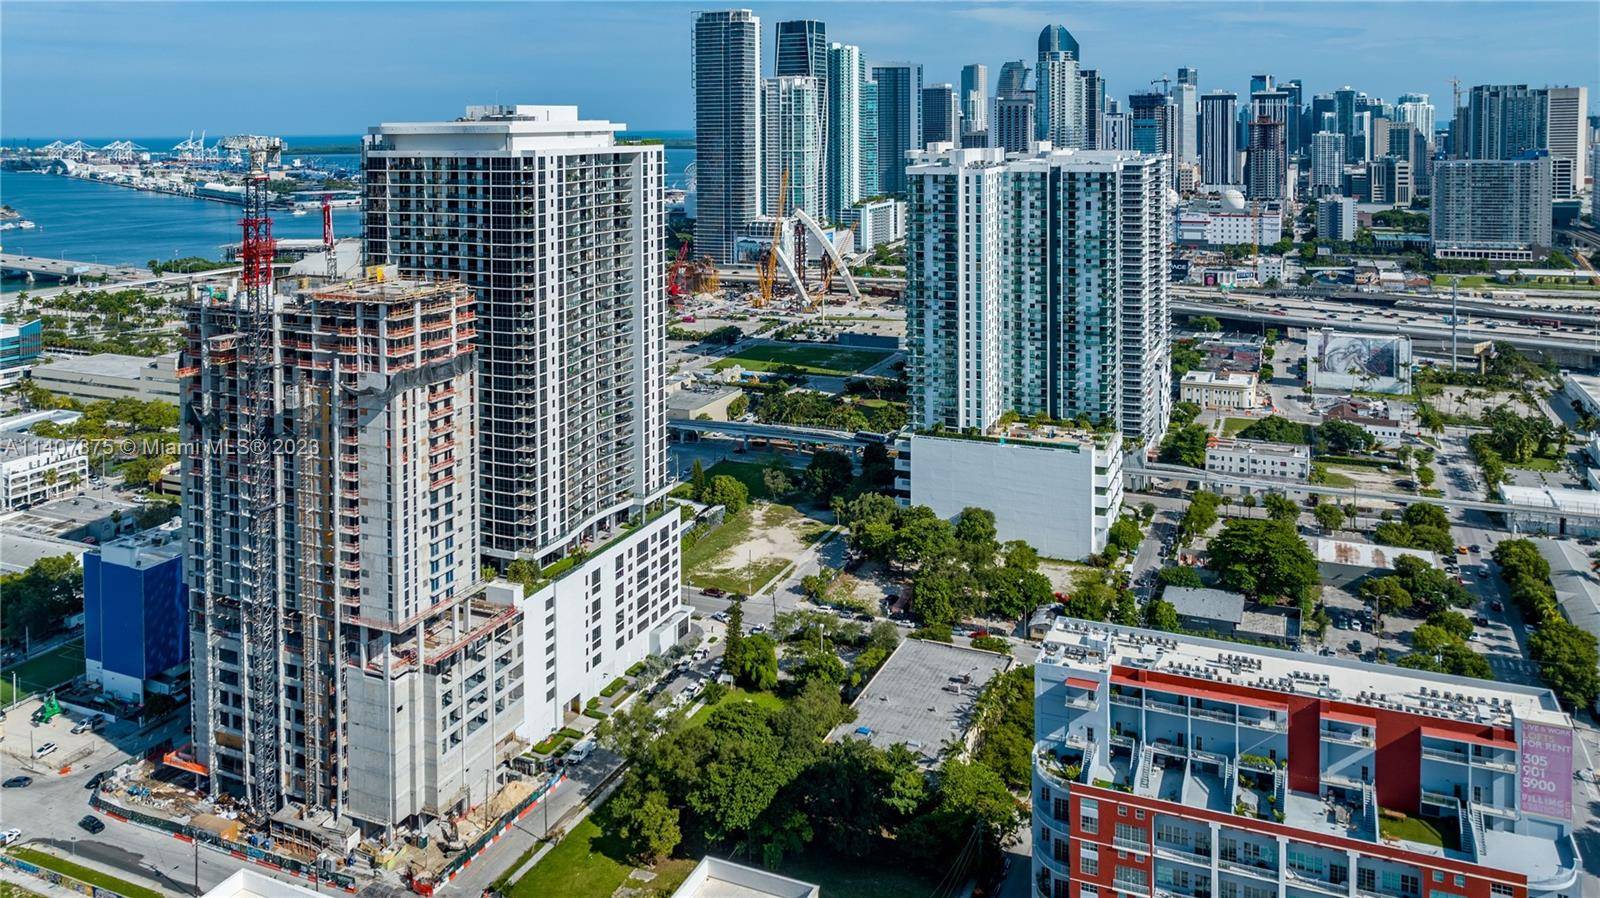 Spectacular breathtaking view from the South East Penthouse at the Canvas Condominium, view also soon to include MWC and Miami's future Signature Bridge.